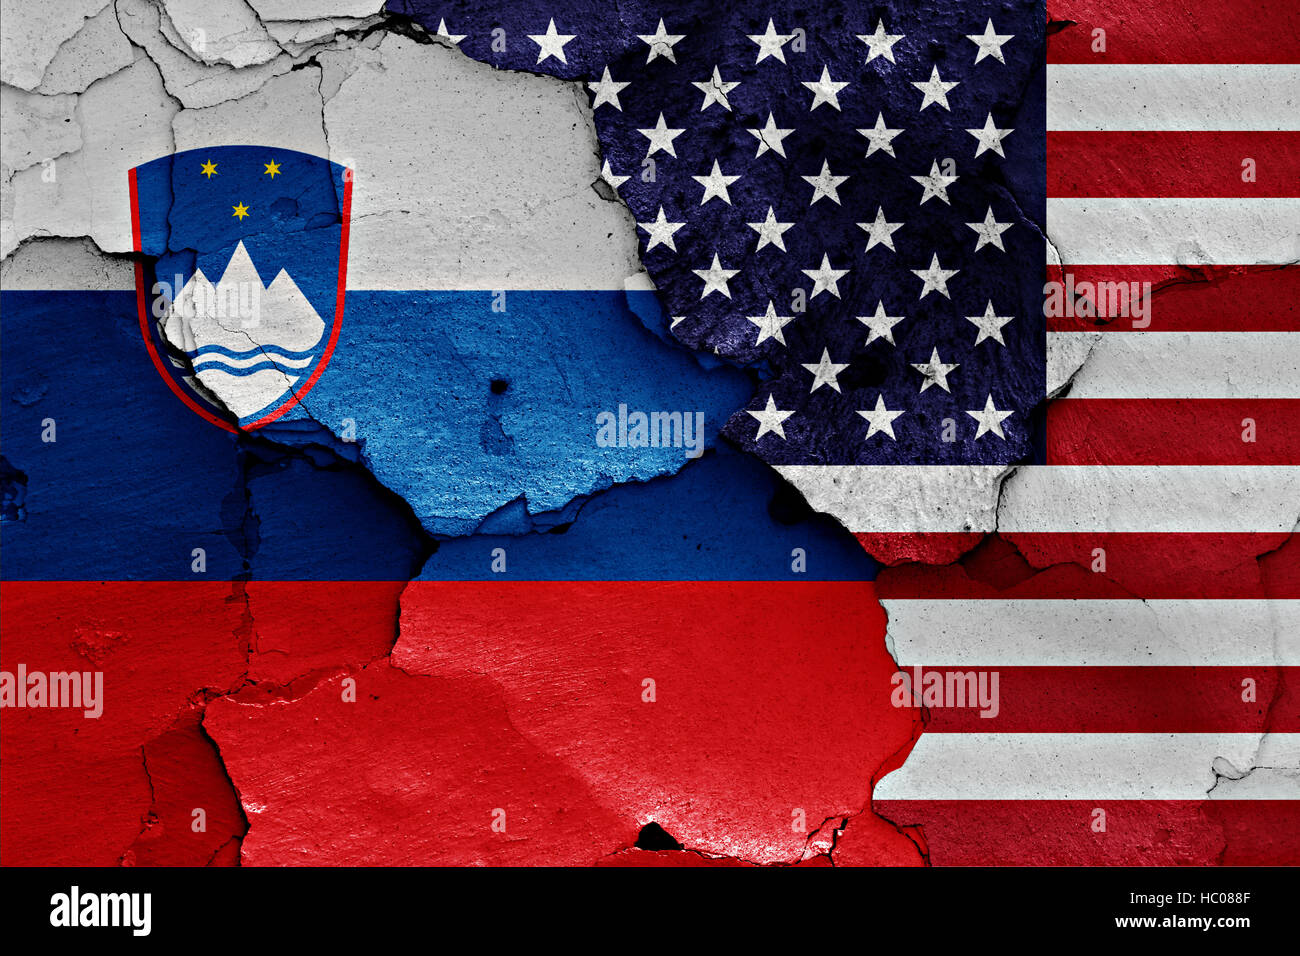 flags of Slovenia and USA painted on cracked wall Stock Photo